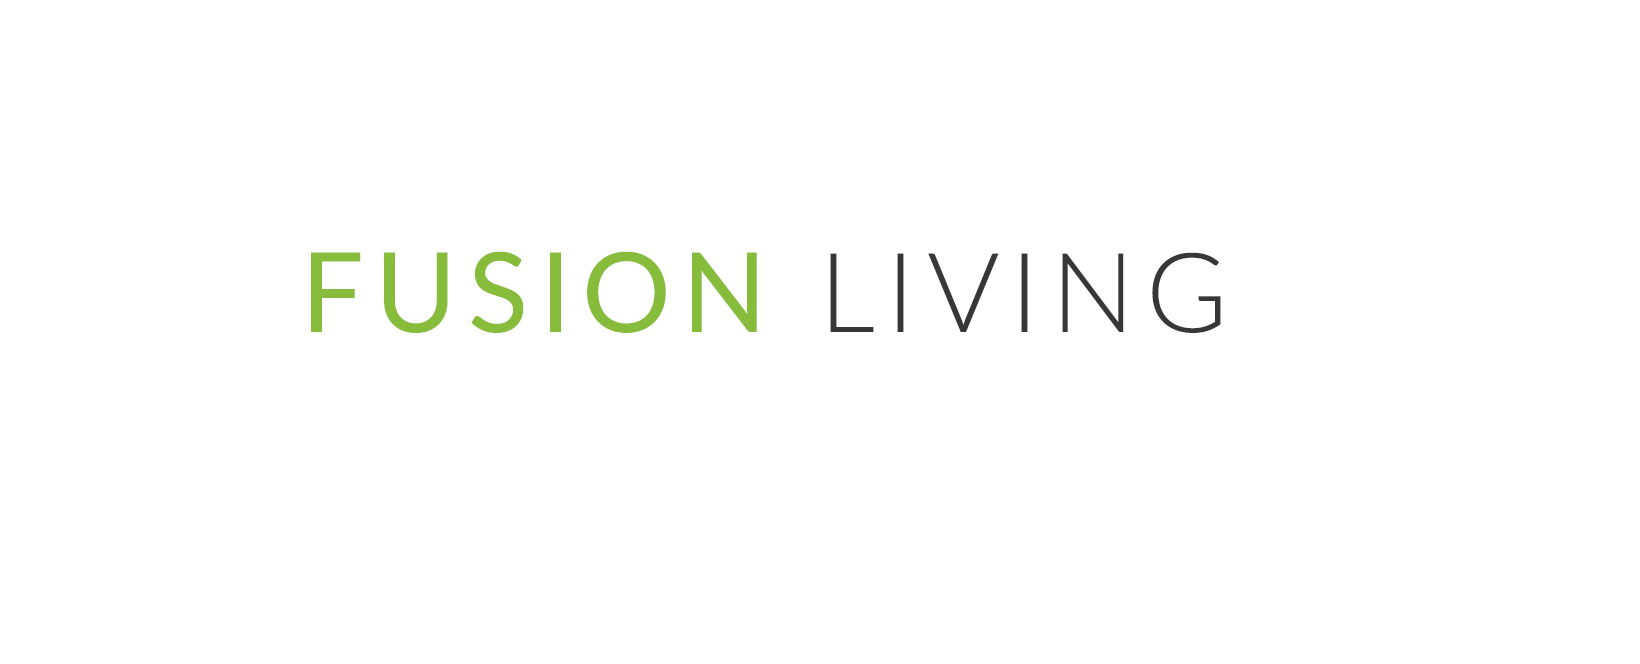 Fusion Living Discount Code